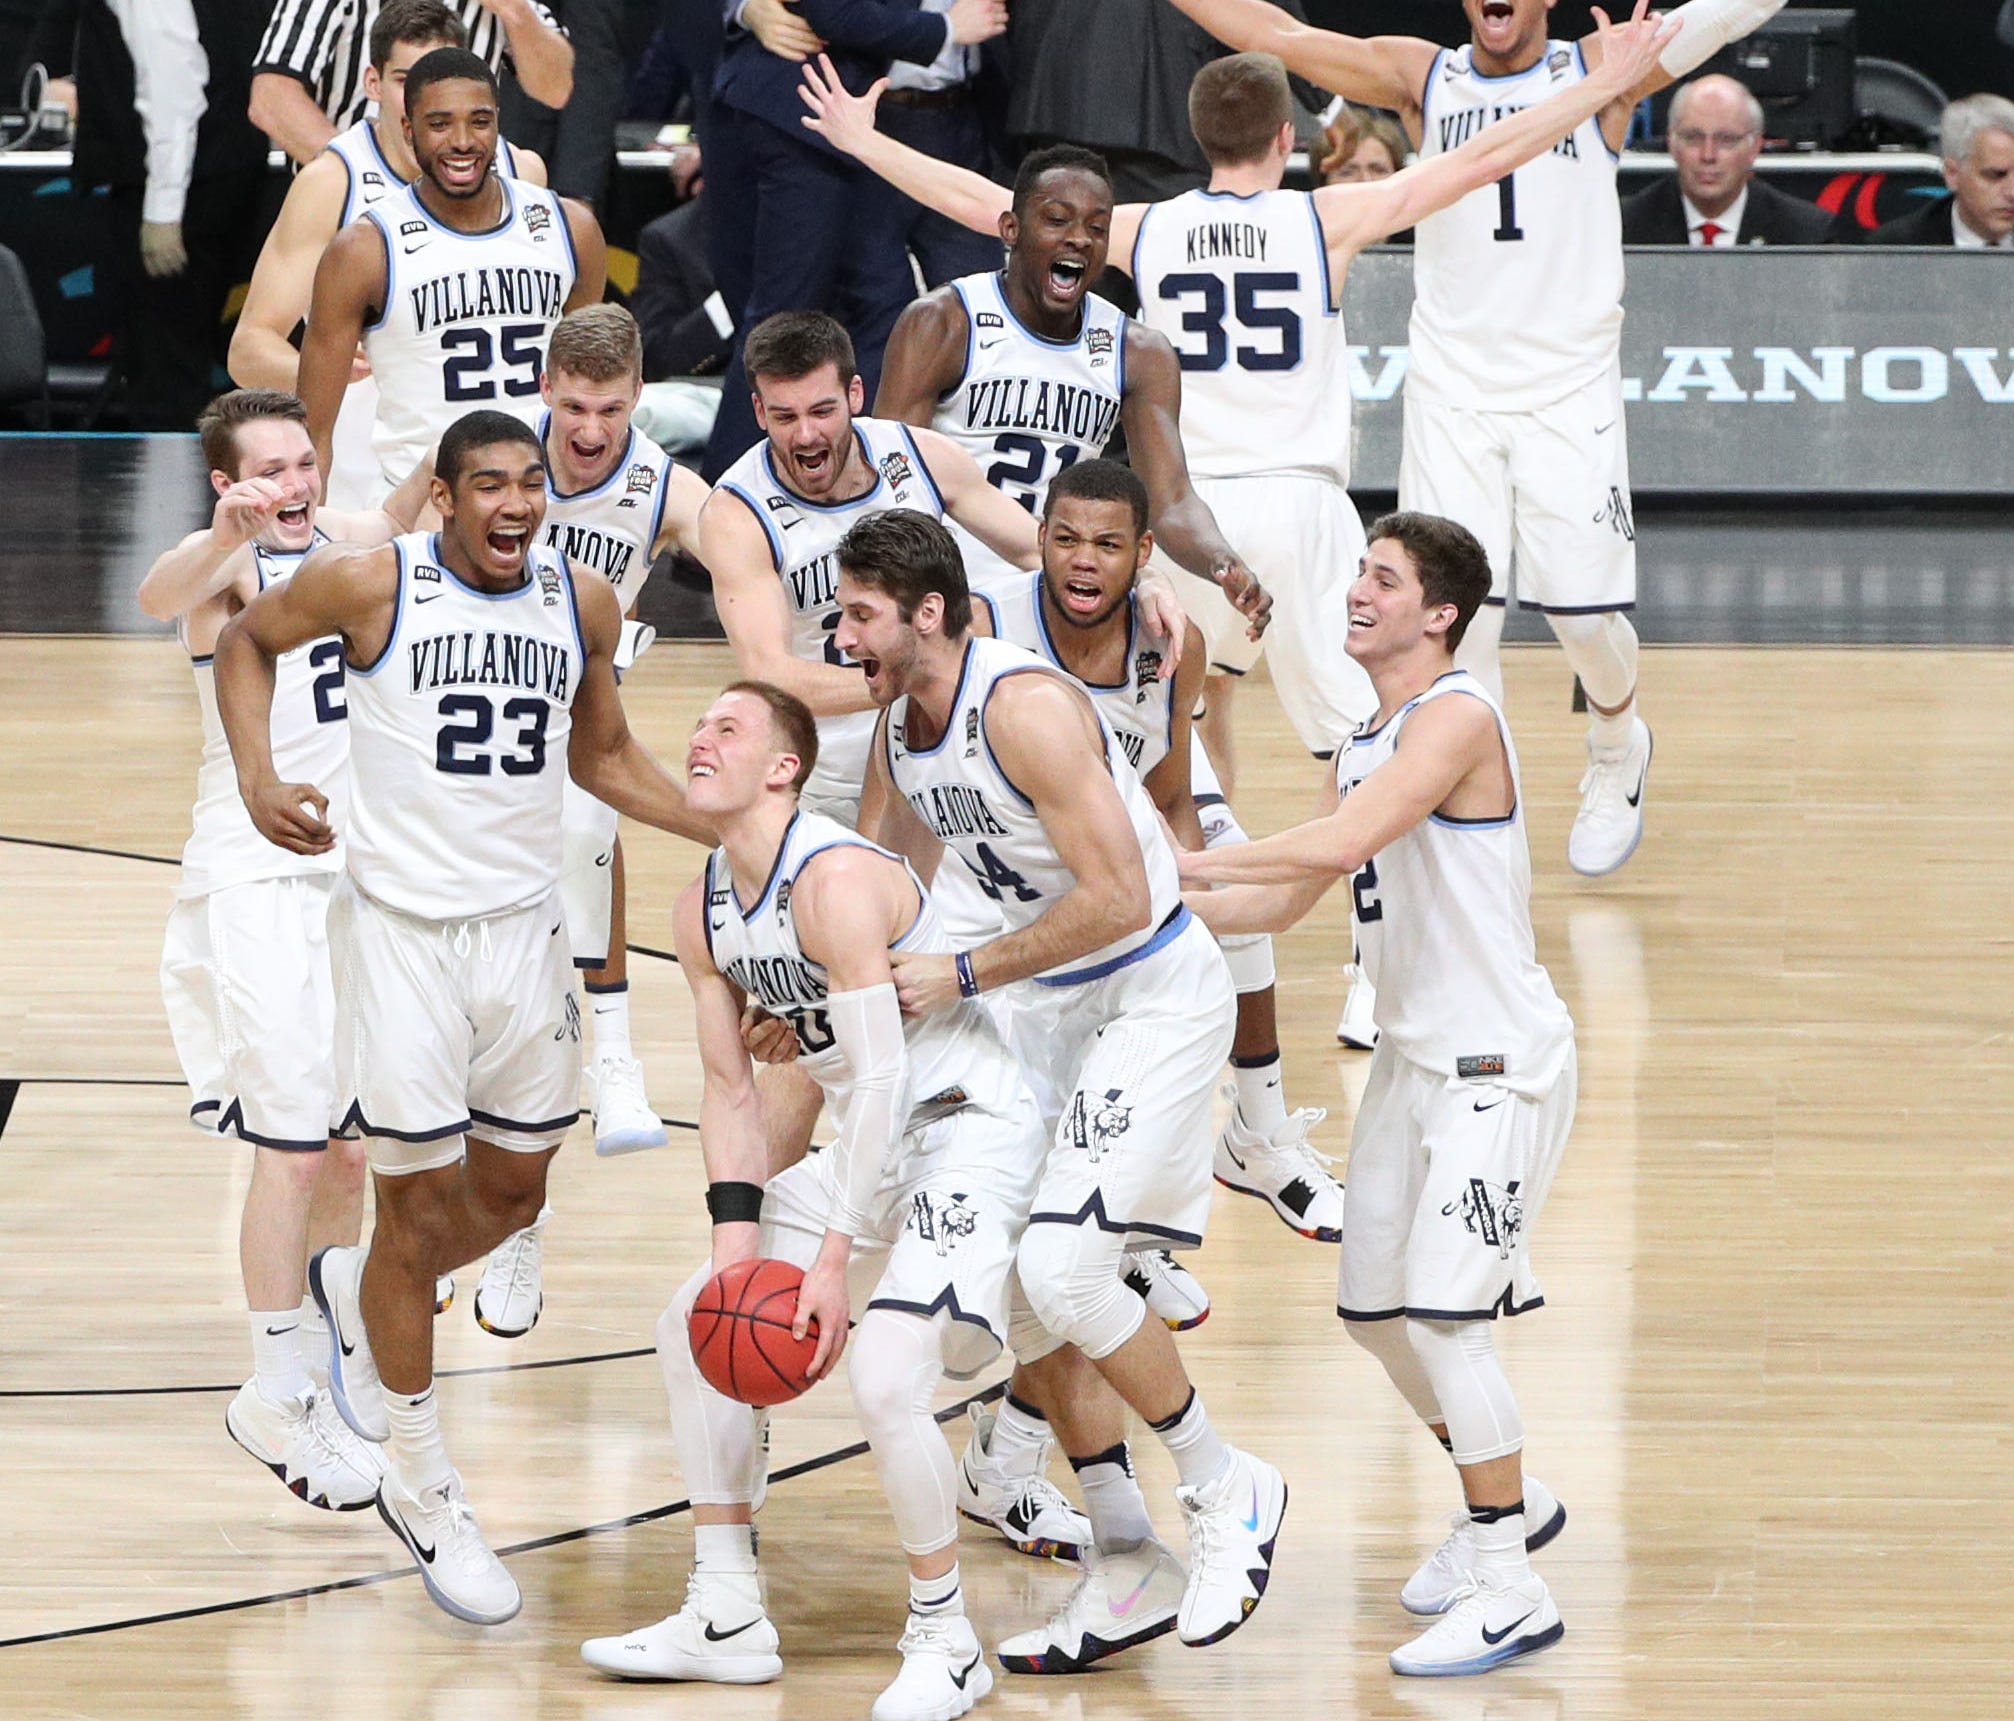 Villanova players celebrate with teammates after defeating Michigan to win the national title in the 2018 NCAA tournament.